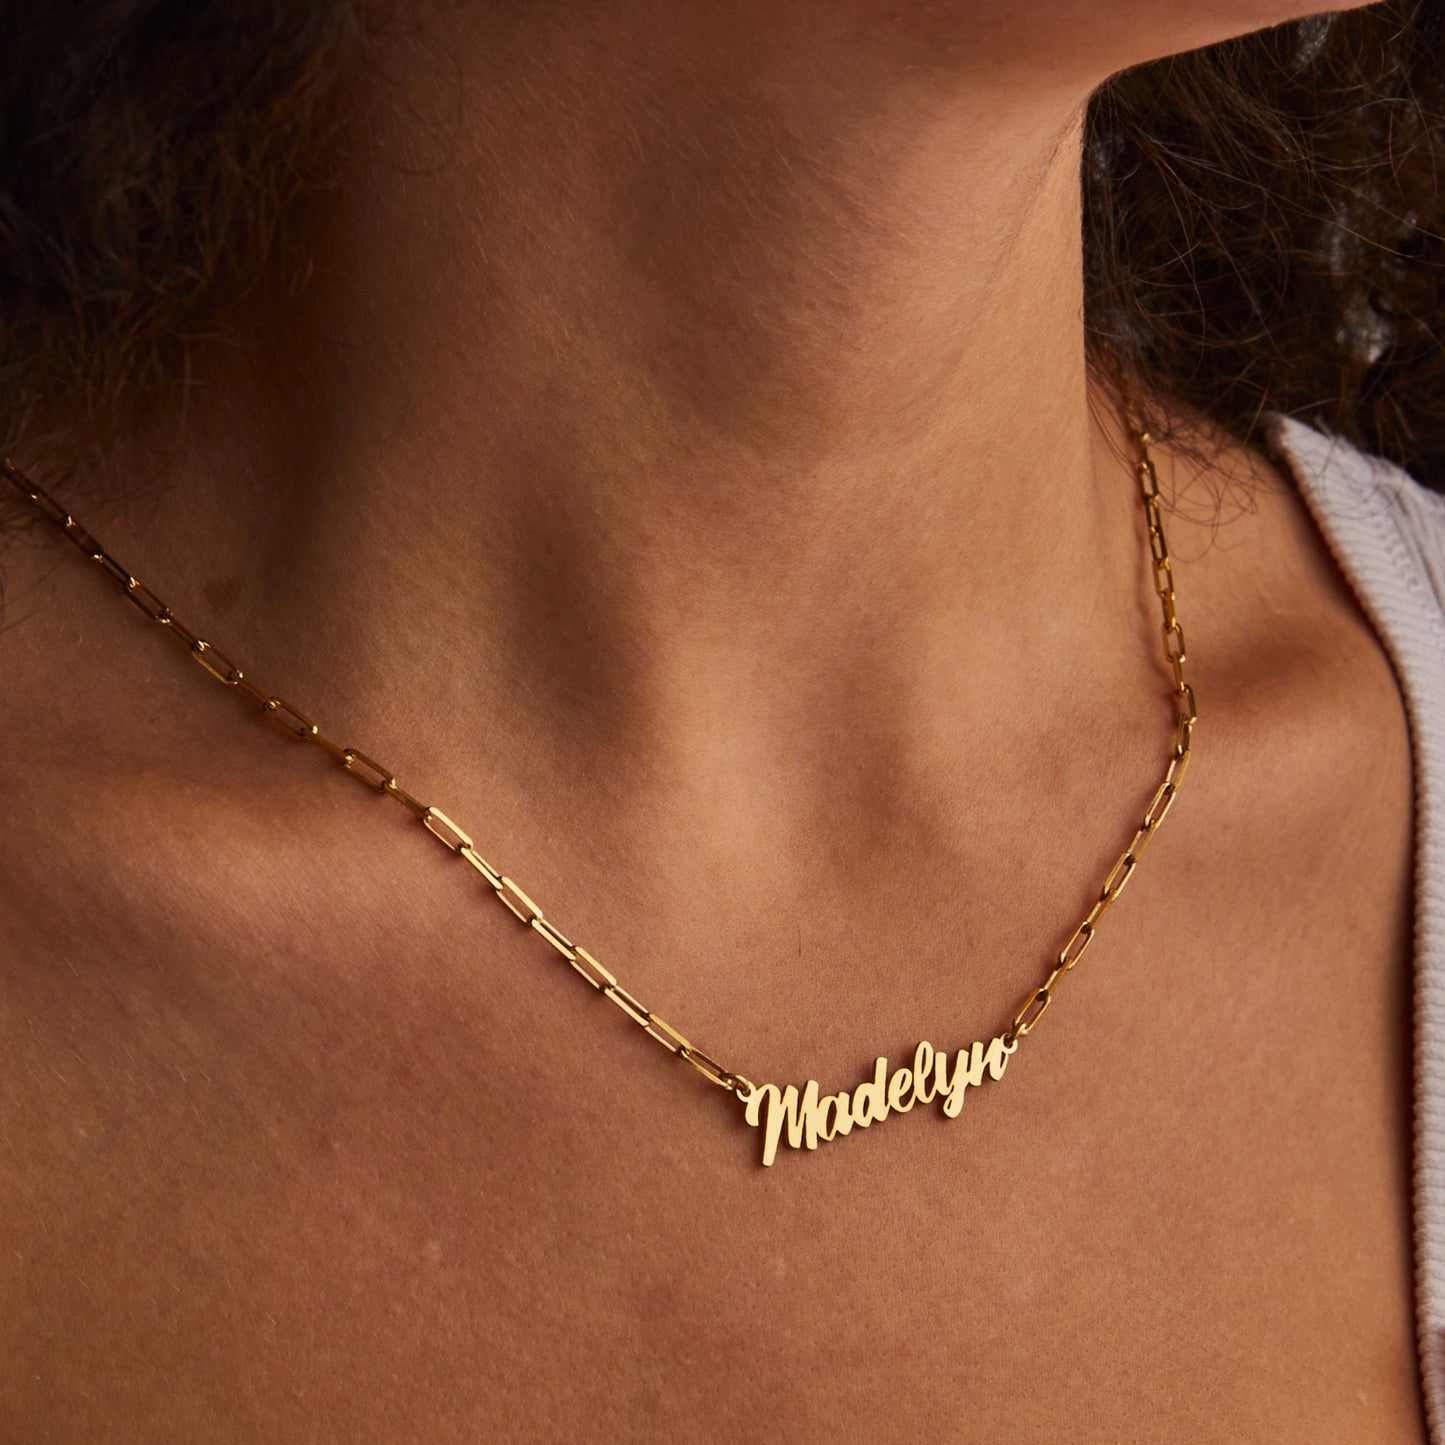 14k Gold Name Necklace, Personalized Gifts For Her, Nameplate Necklace, Custom Name Necklace, Personalized Jewelry for Women